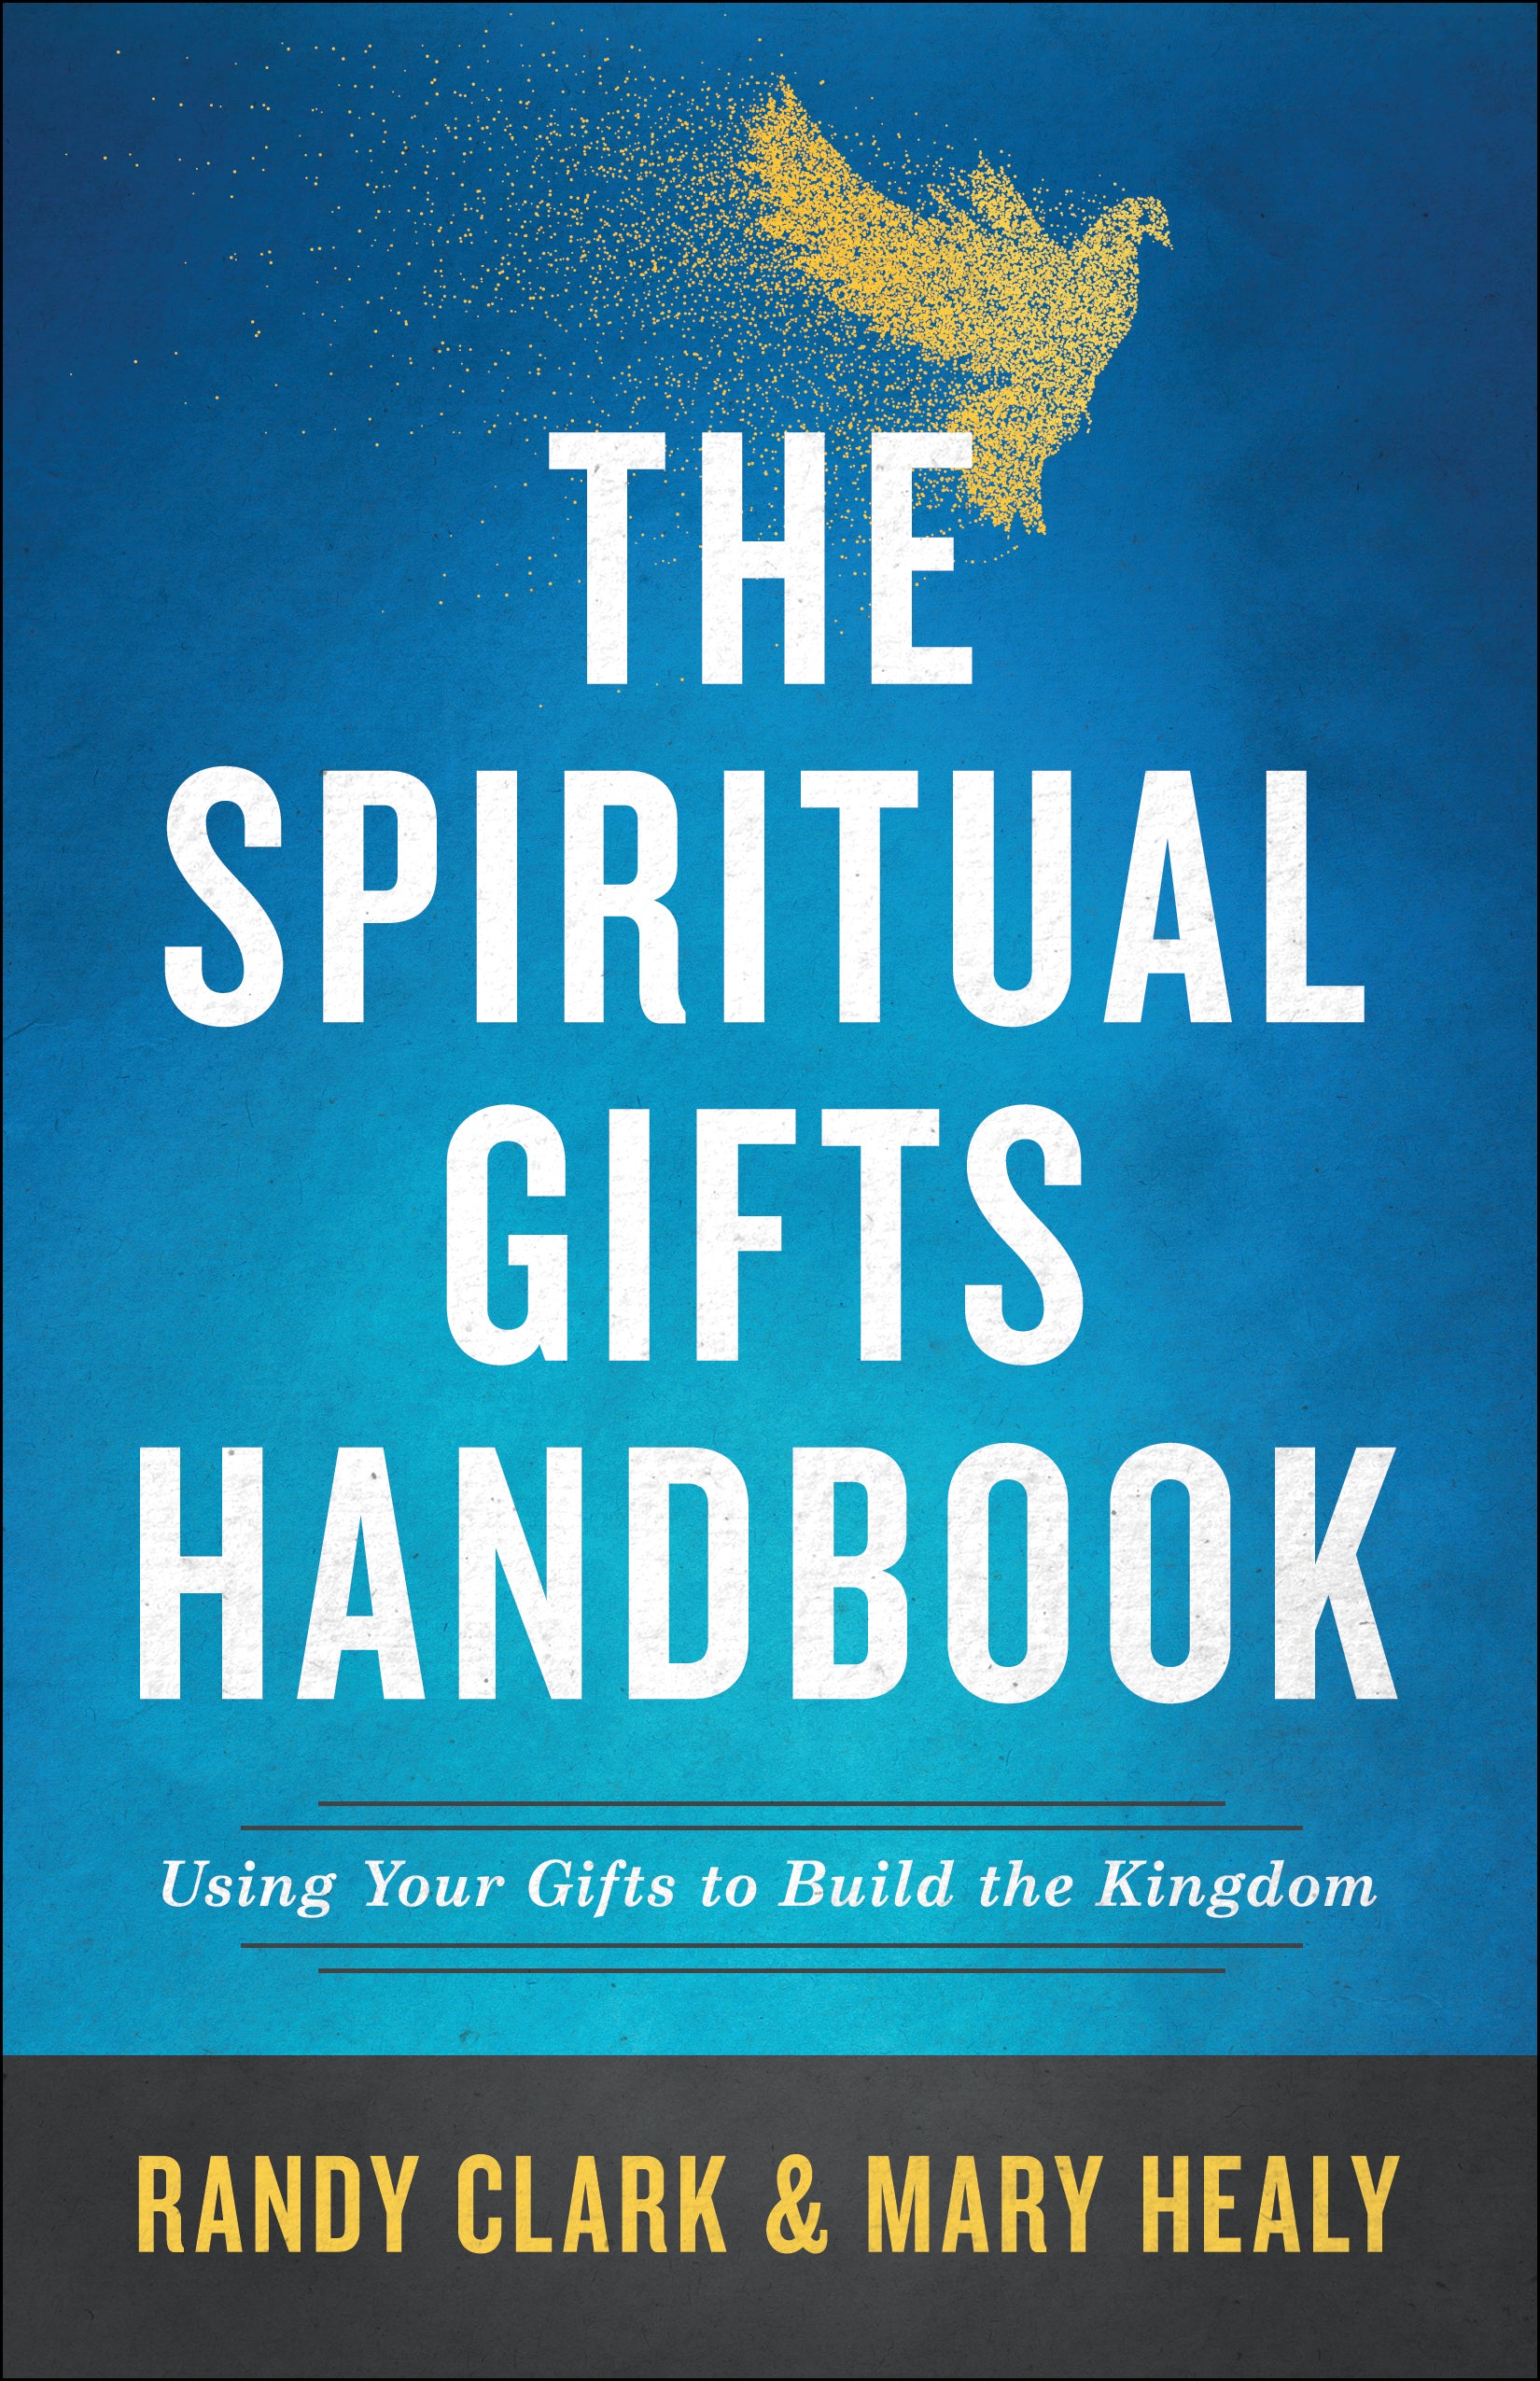 Image of The Spiritual Gifts Handbook other